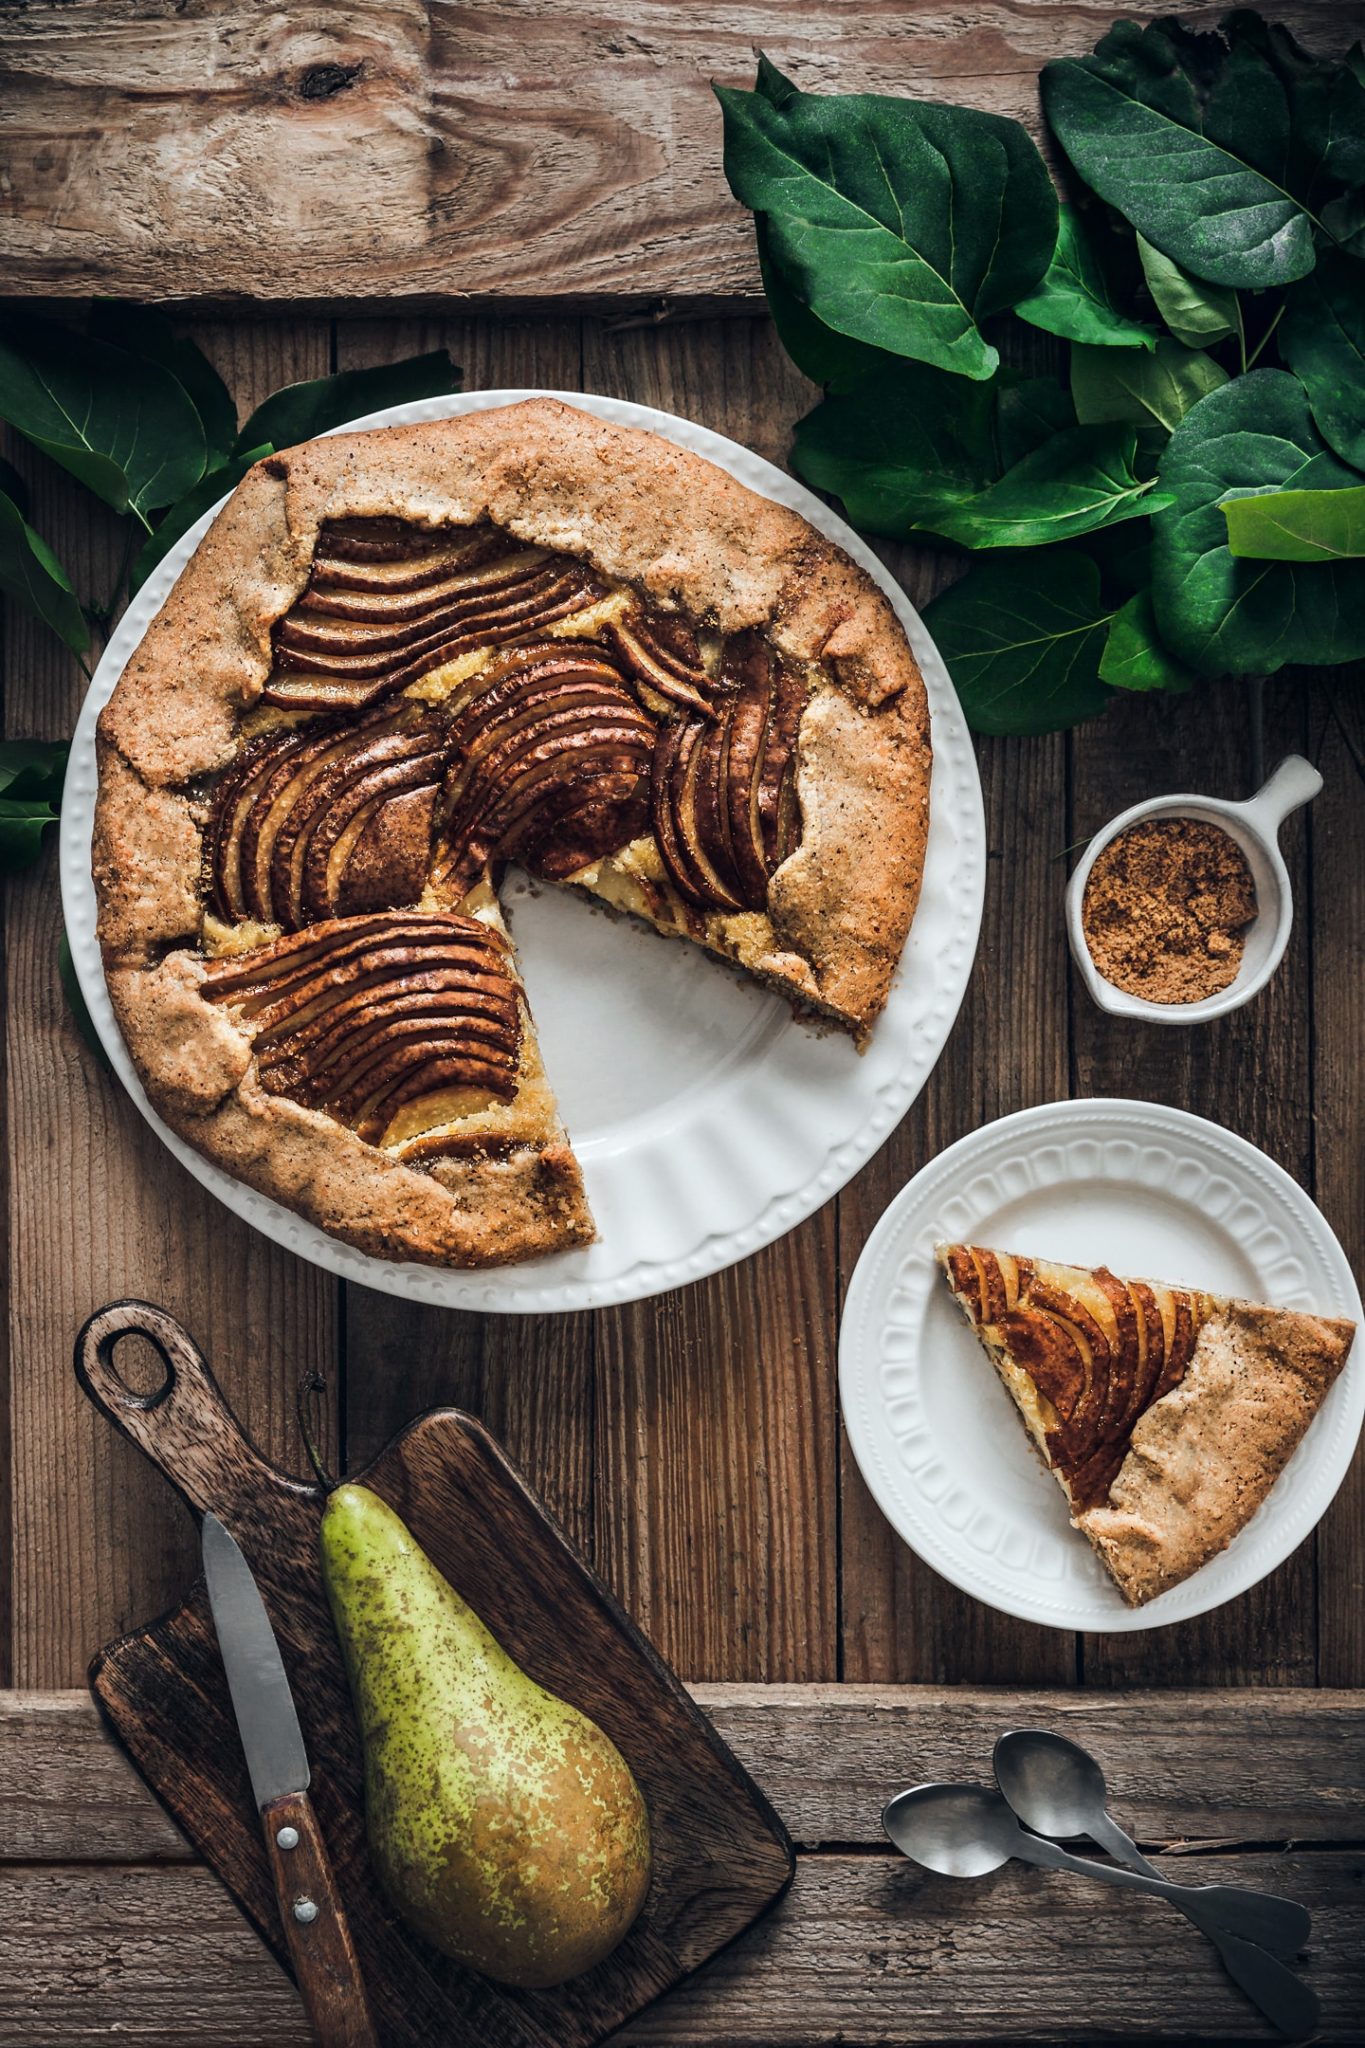 Rustic pie almonds and pears